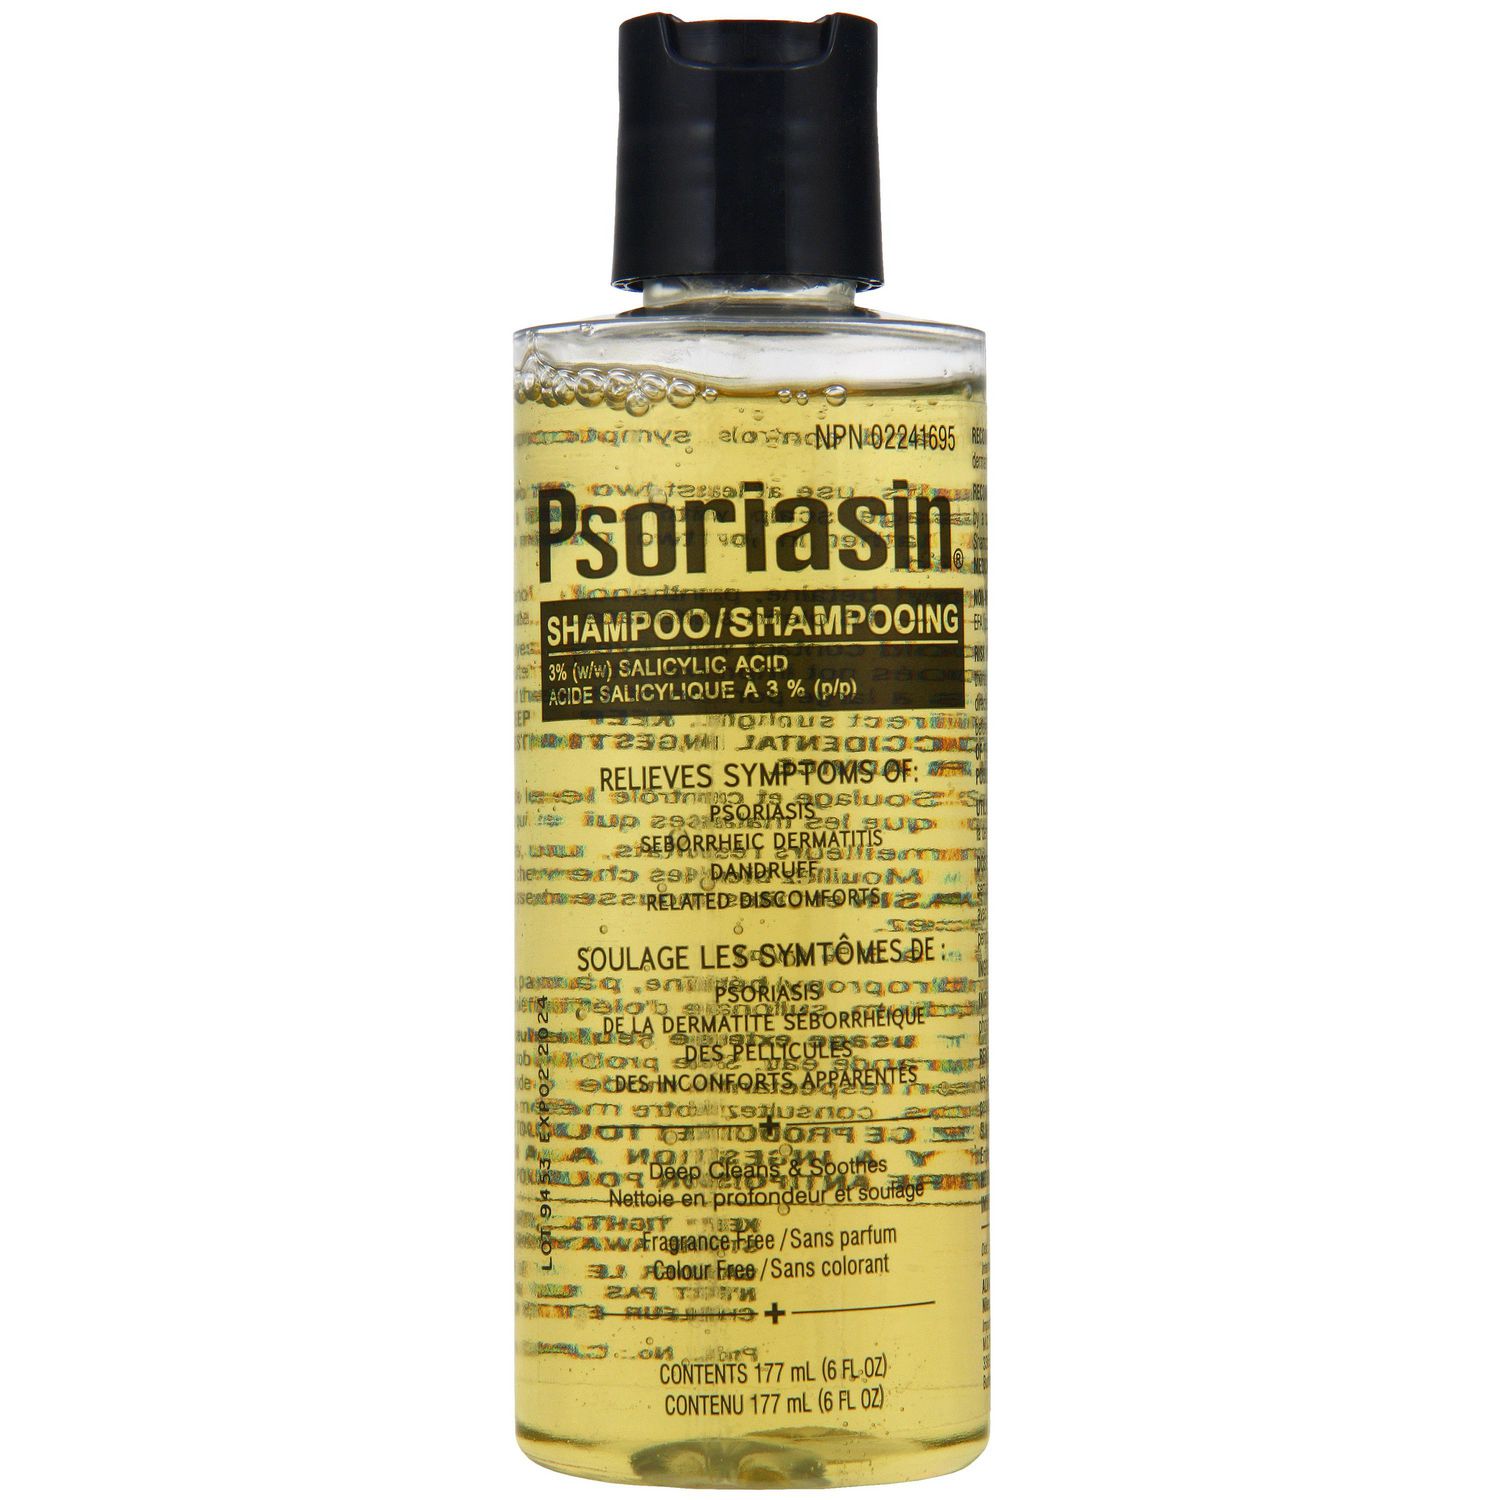 psoriasin therapeutic shampoo review)